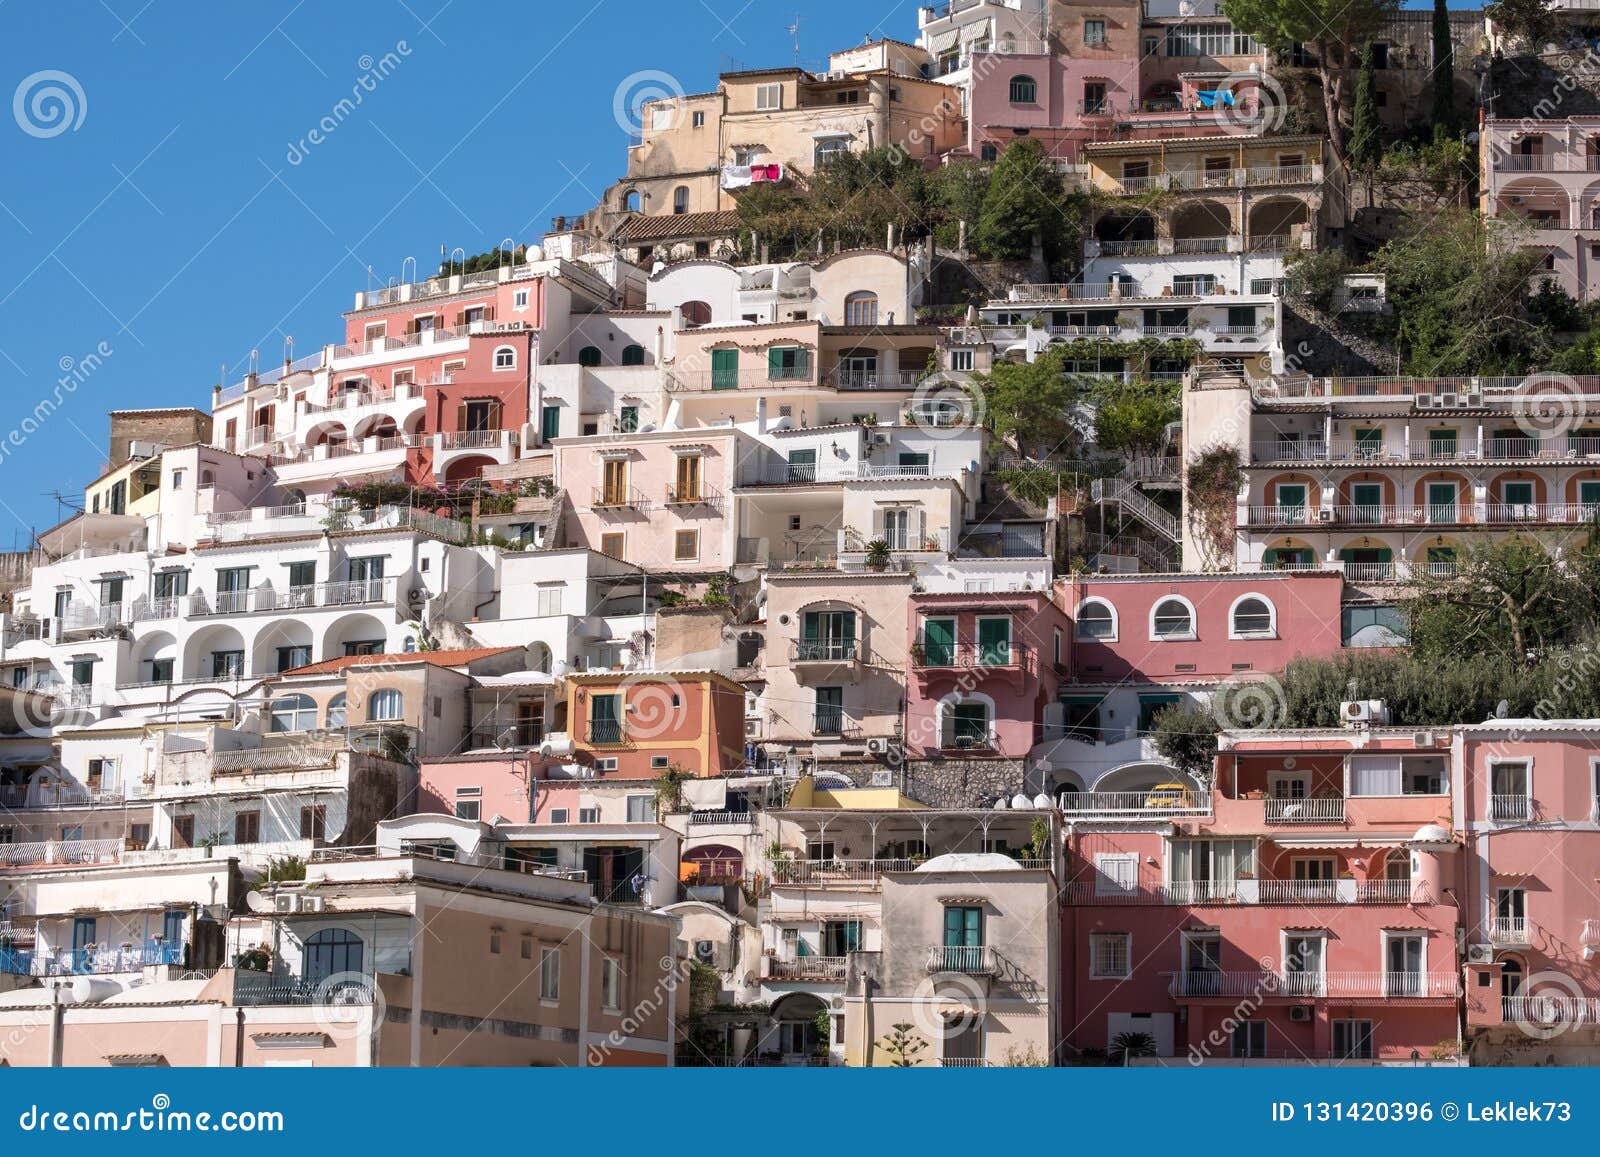 Colourful Houses Hugging the Mountain Side in the Delightful Town of ...